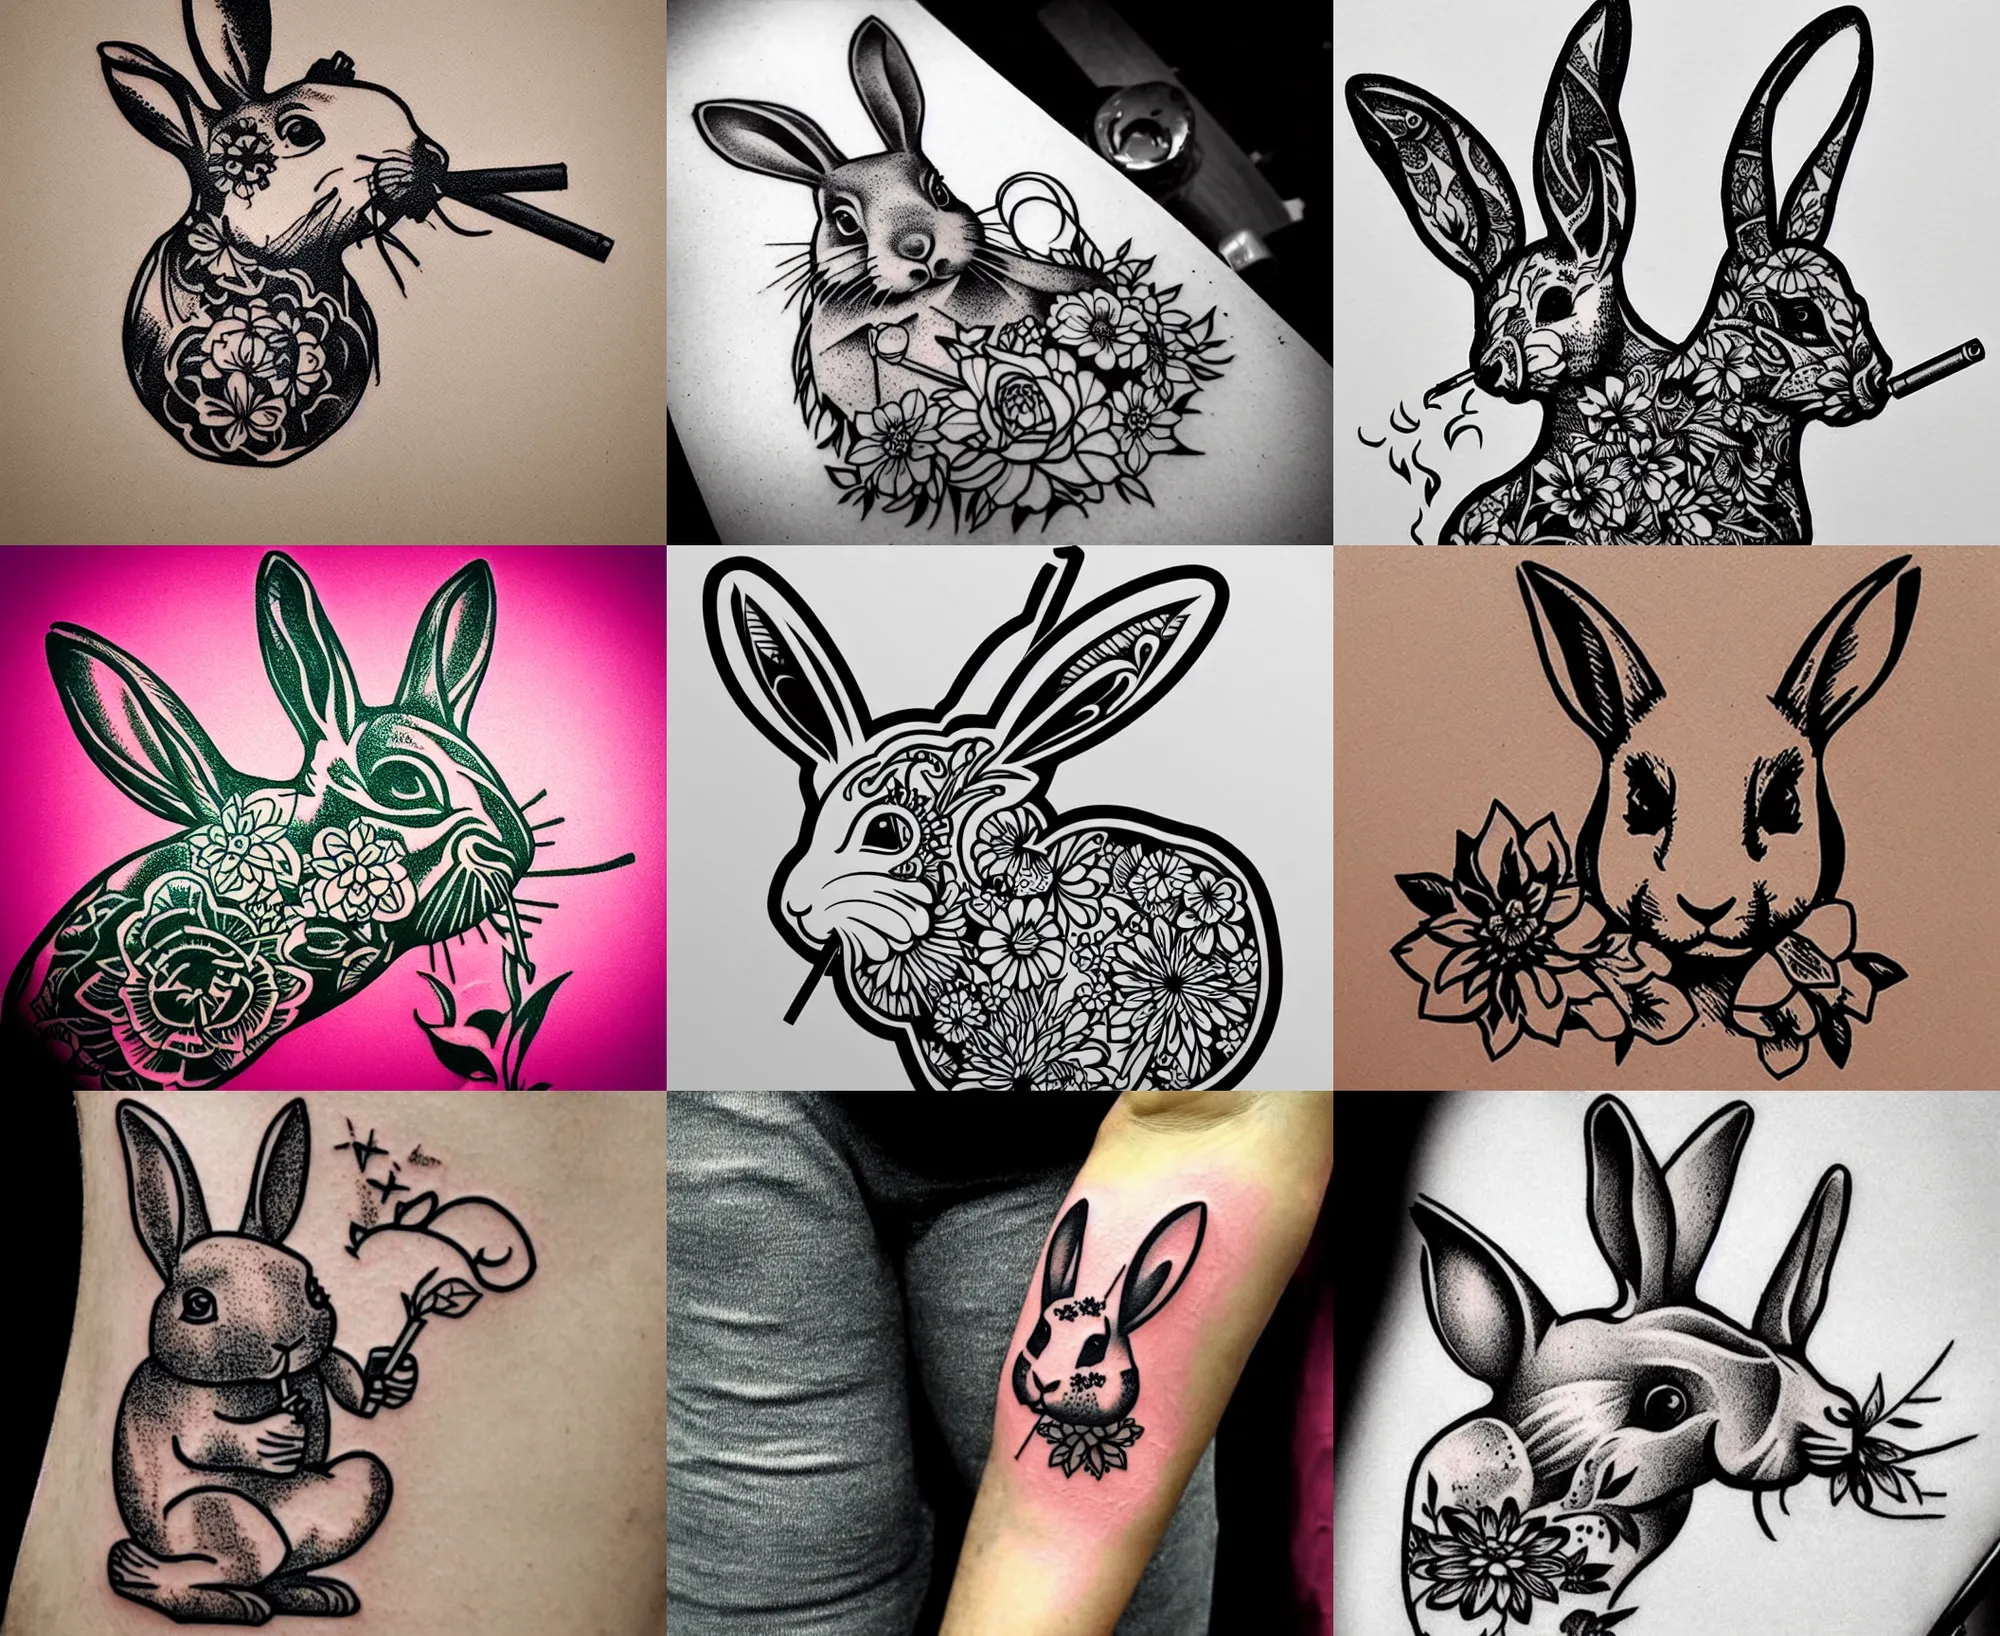 4.4ever Tattoo Nanded - Bunny Tattoo design small #Bunny #rabbit #Tattoo # design #by #ganeshptattooist #Nanded #smalltattoo #pikachu #bunnylove # rabbits #love #2022 | Facebook